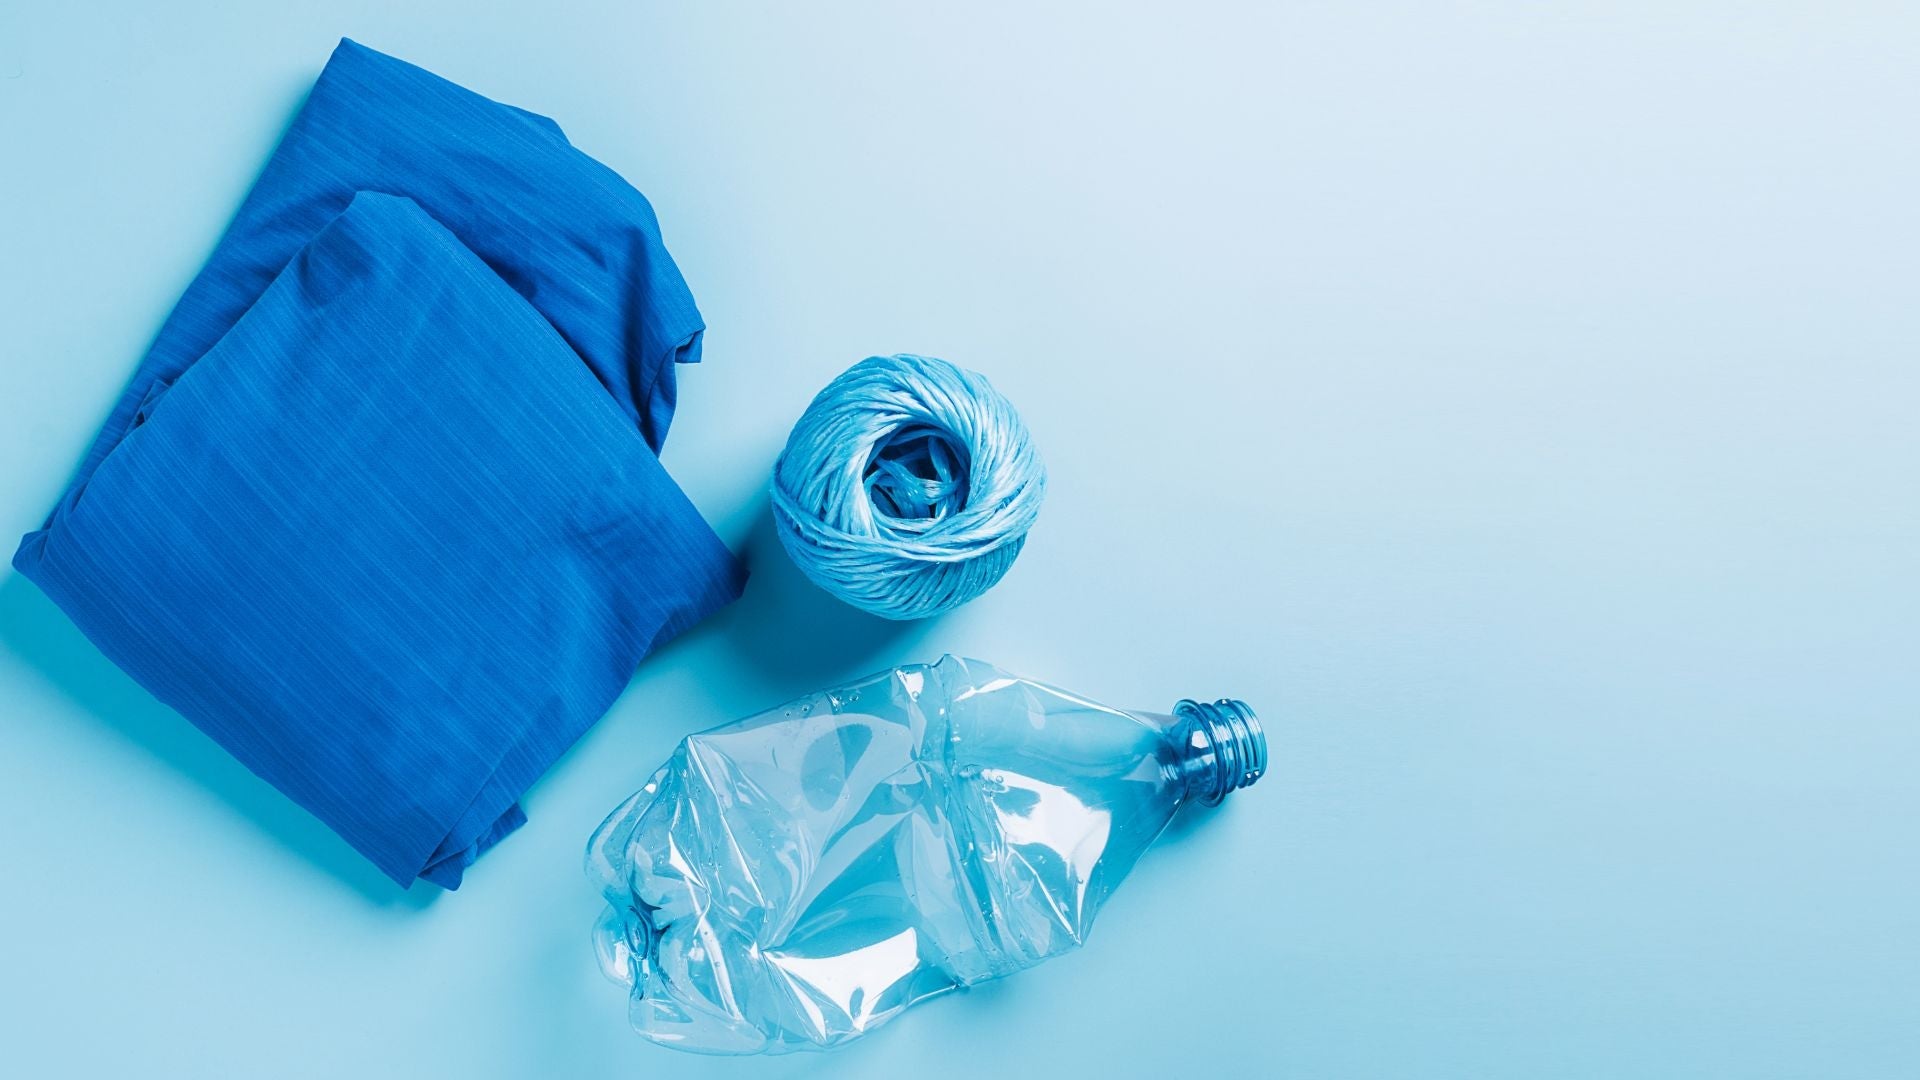 What's The Deal With Recycled Polyester?